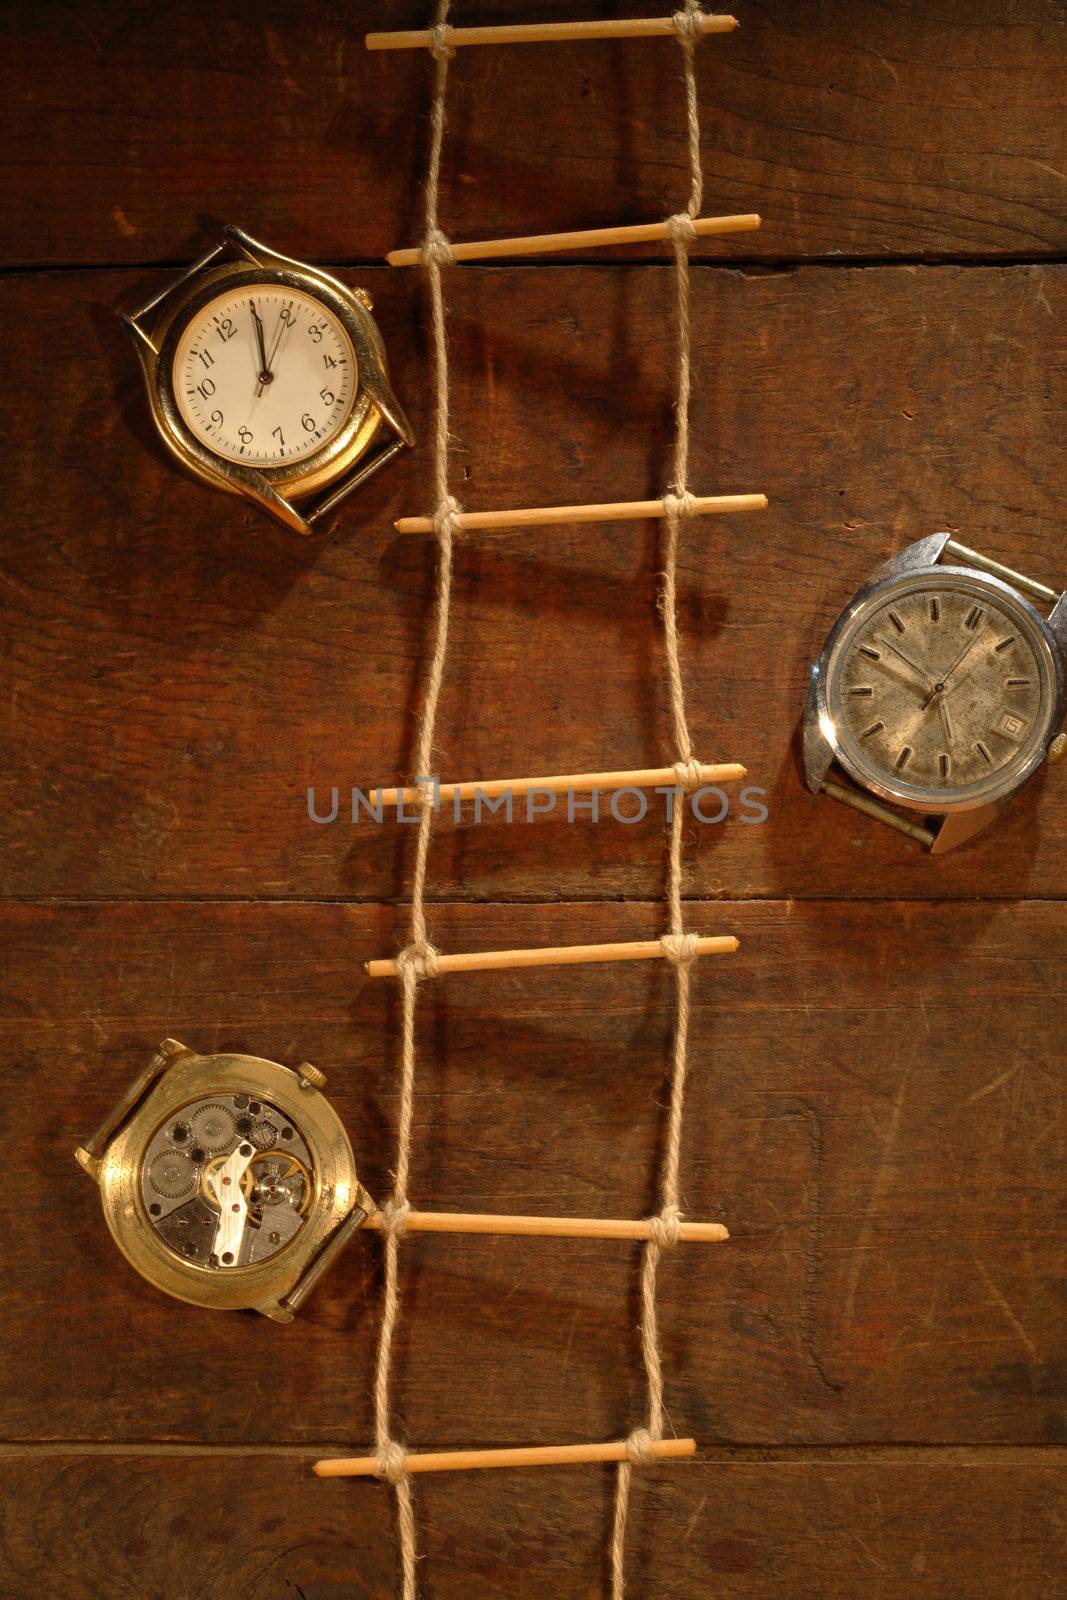 Rope ladder hanging on wooden background with old watches